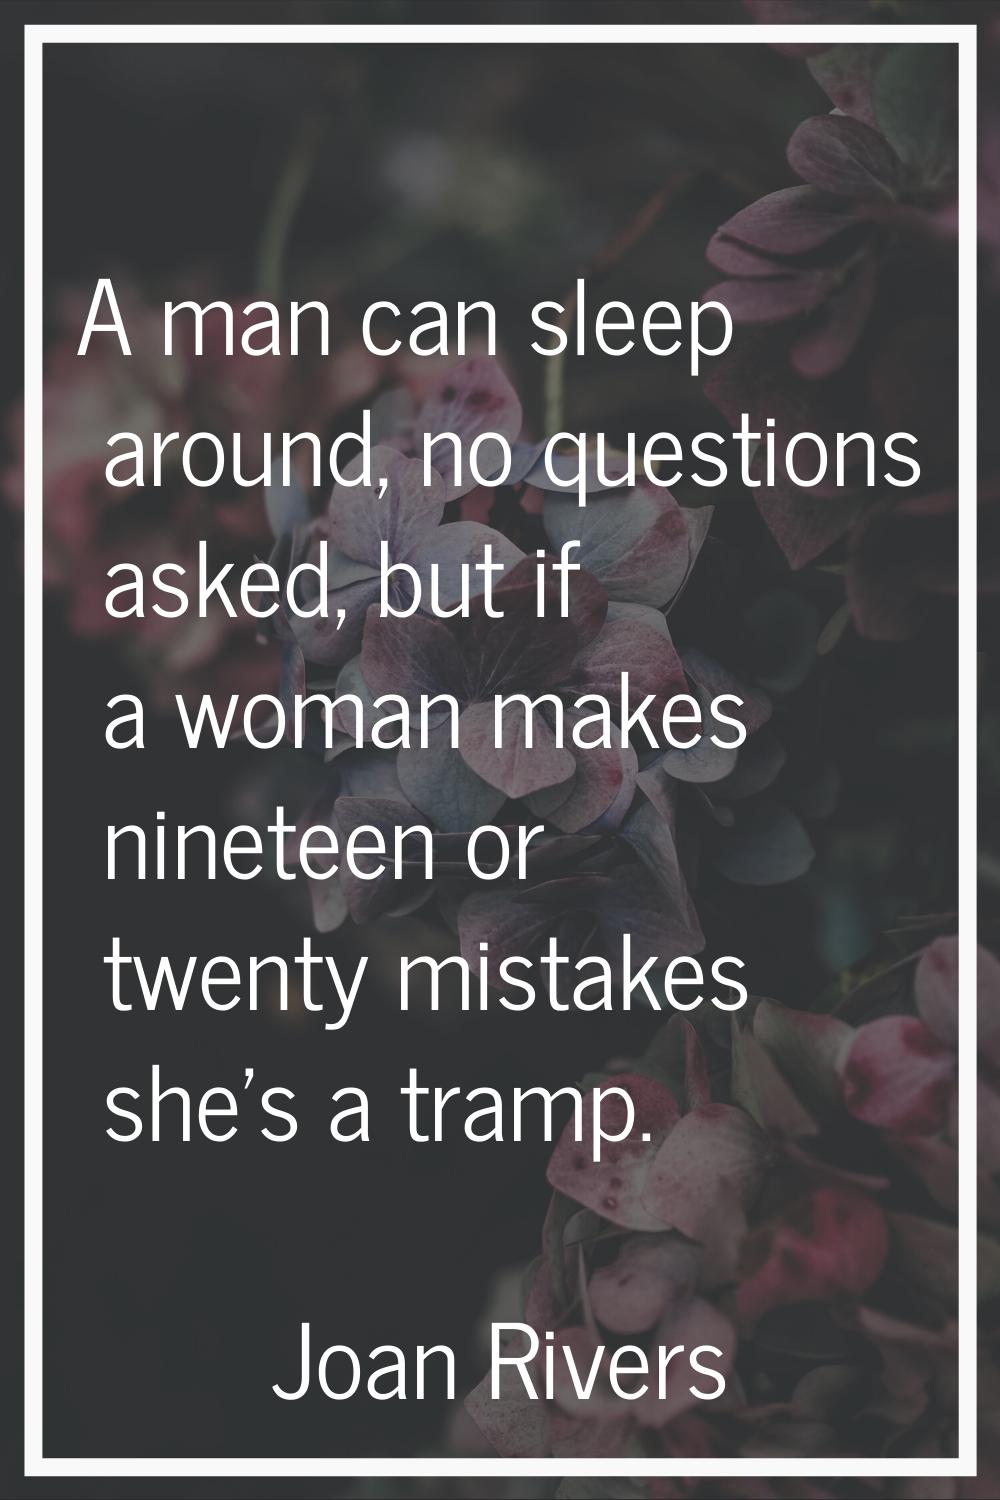 A man can sleep around, no questions asked, but if a woman makes nineteen or twenty mistakes she's 